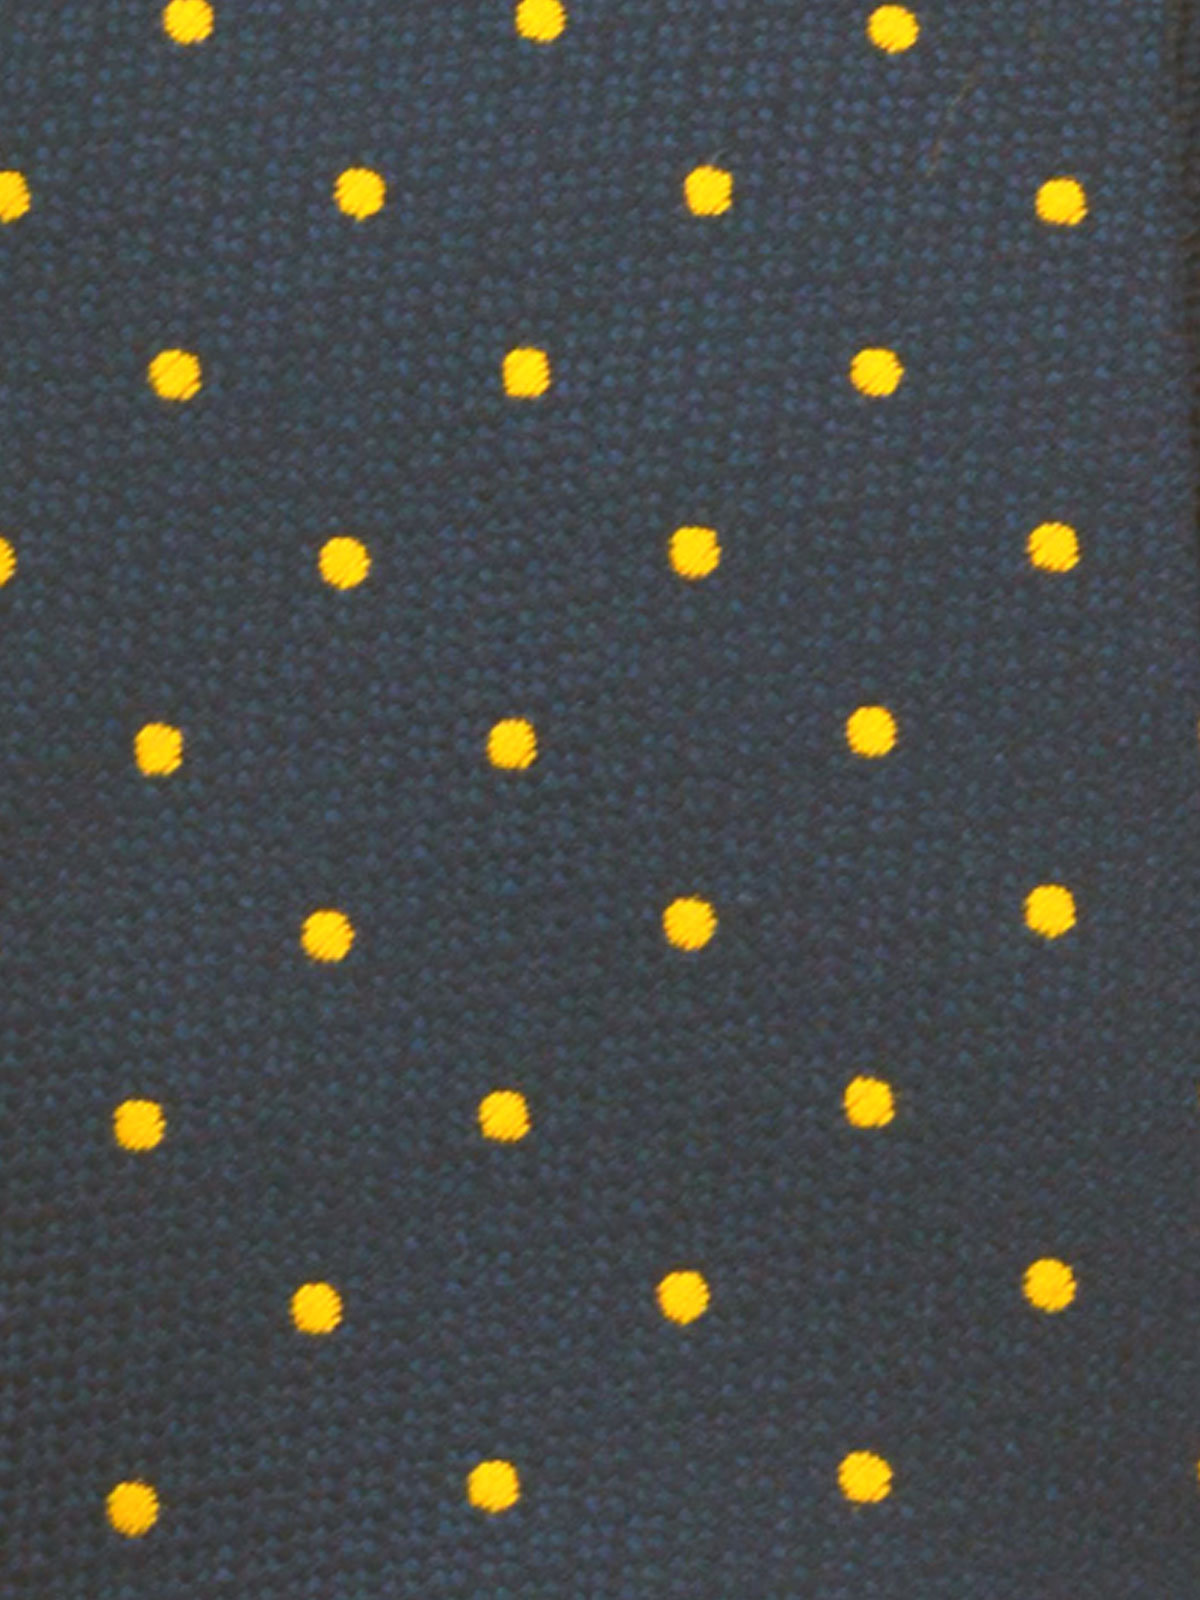 Blue tie with yellow dots - 10026 - € 14.06 img2